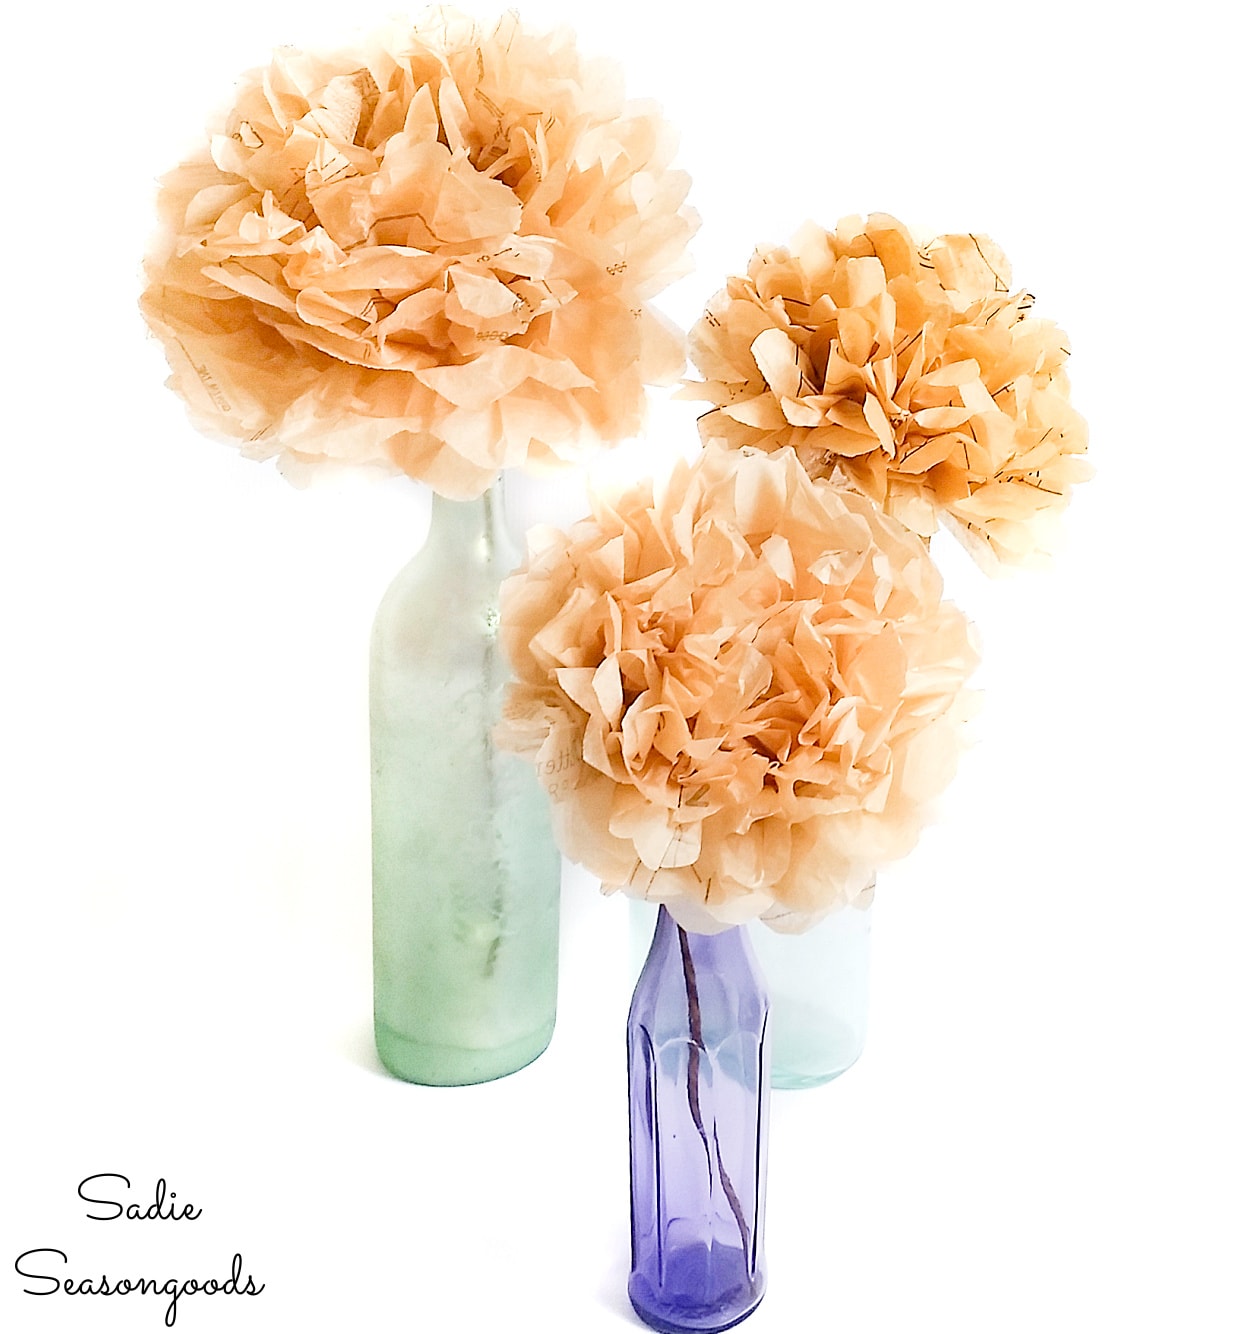 DIY Tissue Paper Flowers from Vintage Sewing Patterns